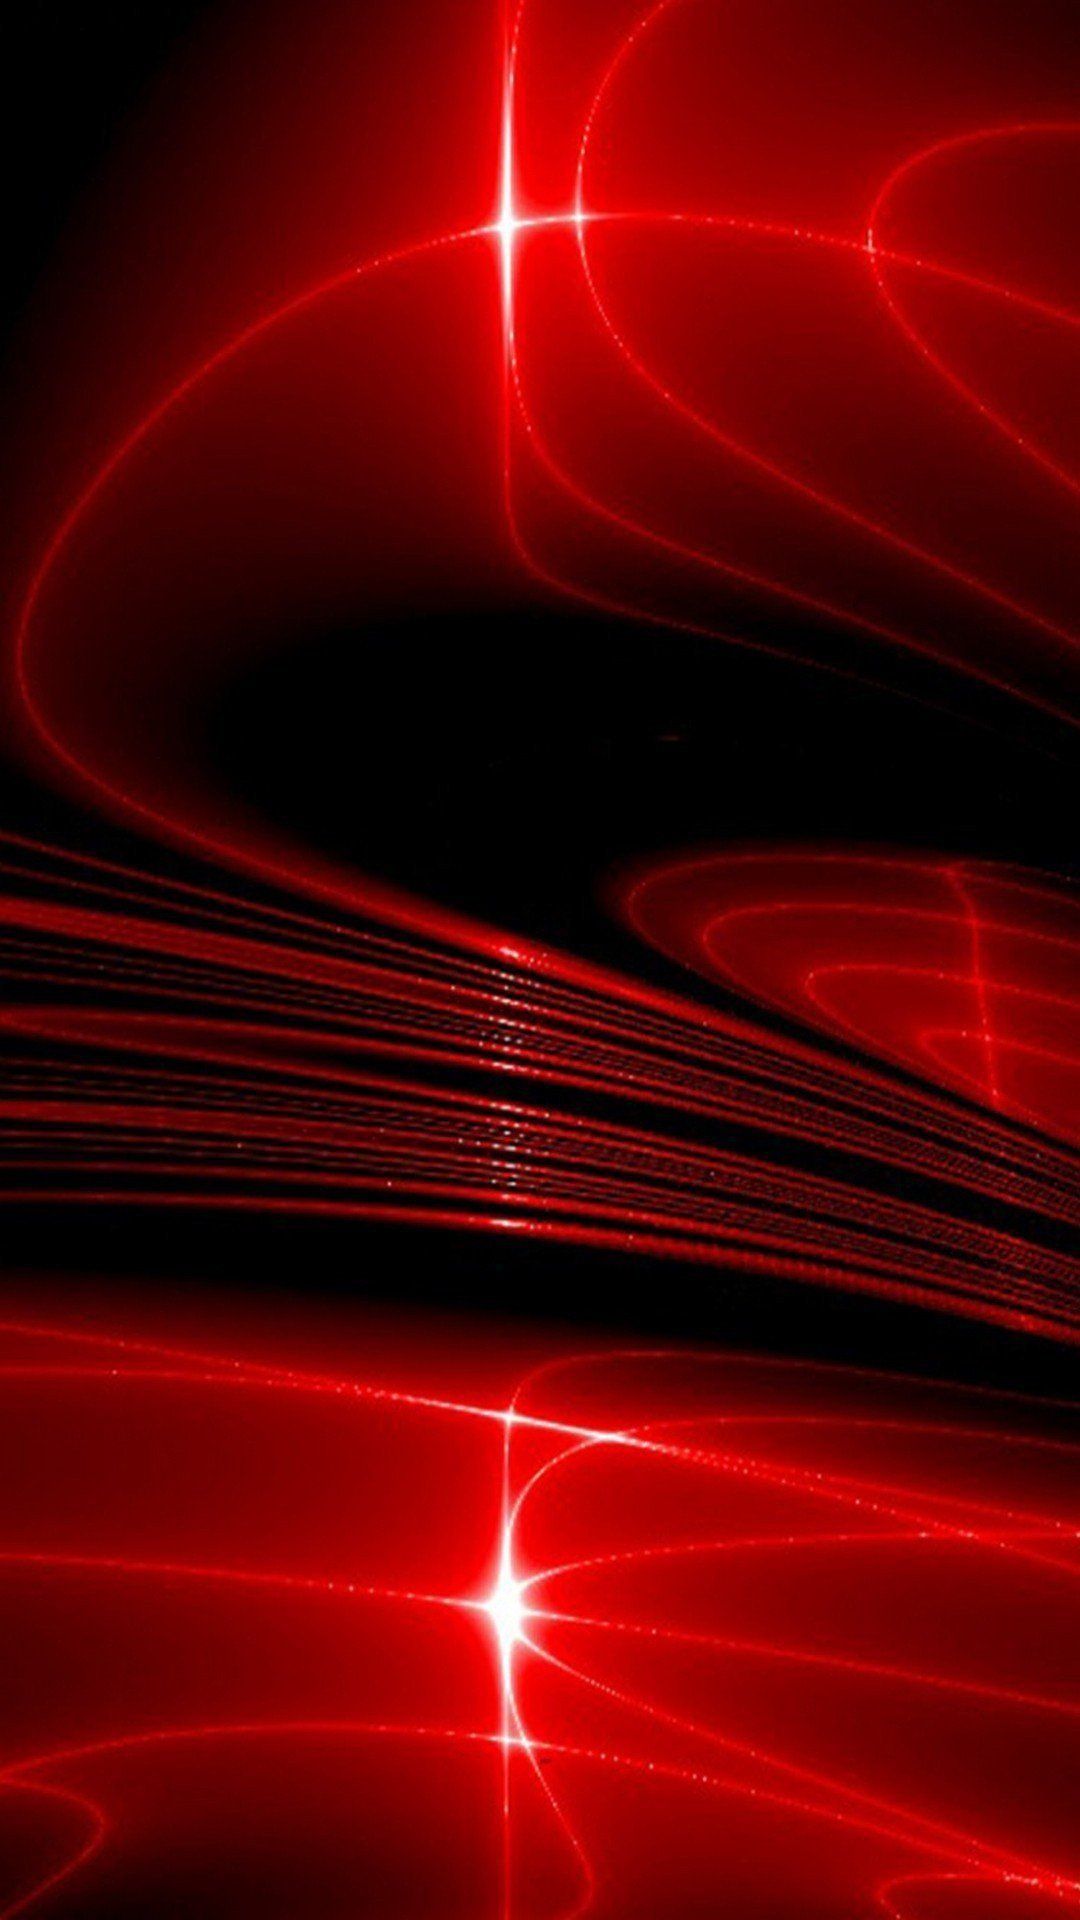 Cool red dark HD mobile wallpaper cool red dark HD mobile wallpaper Abstract Download Free Mobile. Mobile wallpaper, Cellphone wallpaper, HD wallpaper for mobile